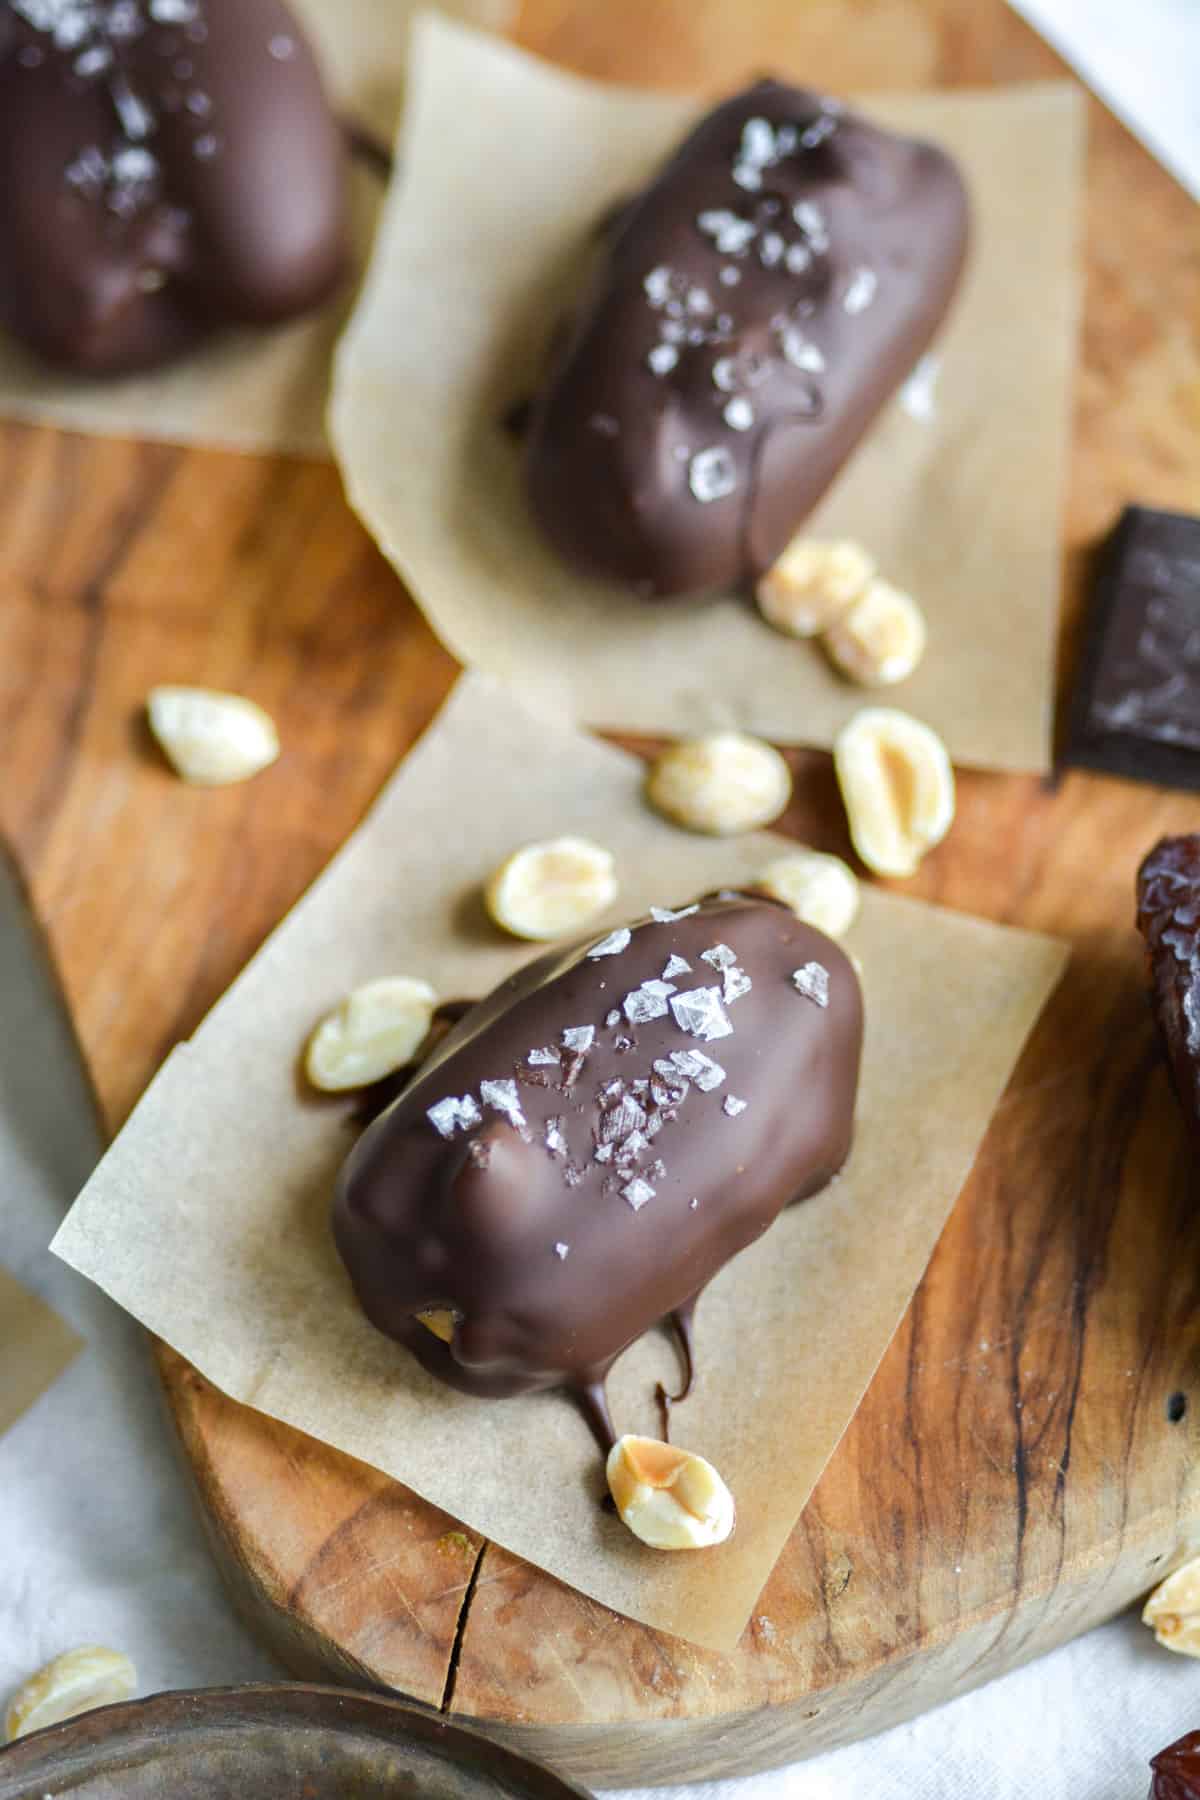 Chocolate covered dates topped with flakey salt on a wooden board with peanuts in the scene.